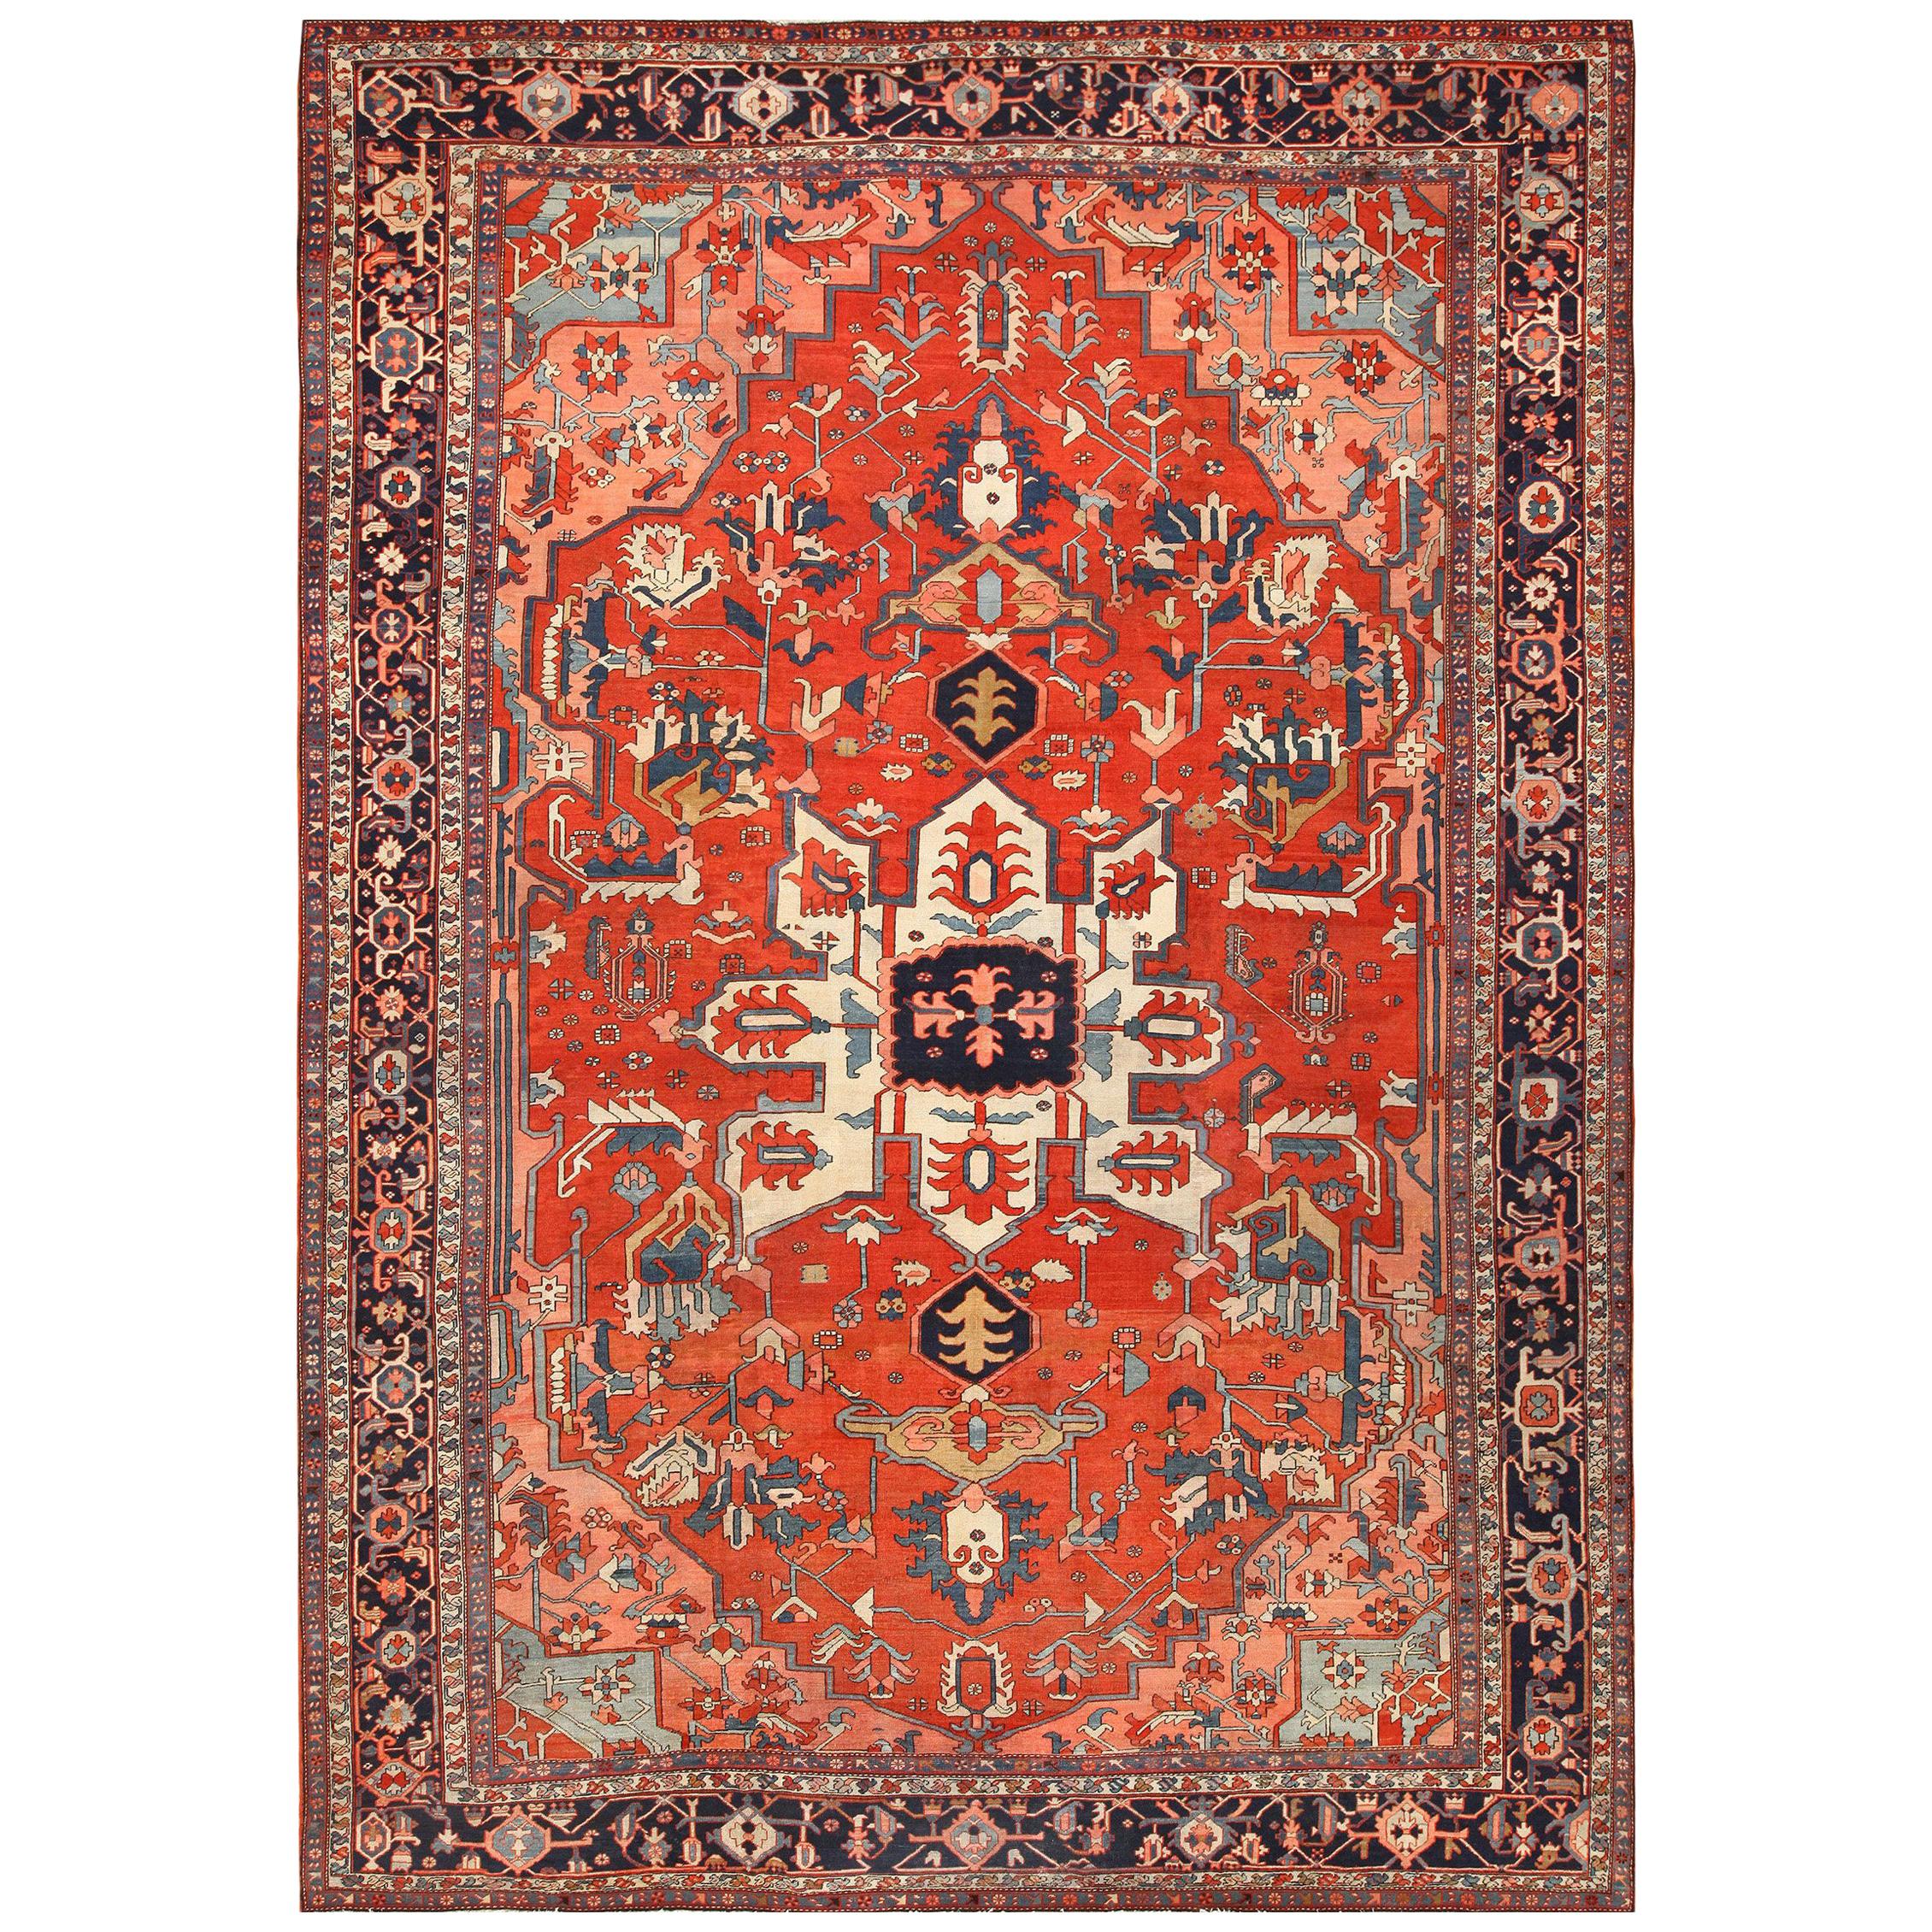 Antique Serapi Persian Rug. Size: 12 ft x 17 ft 6 in